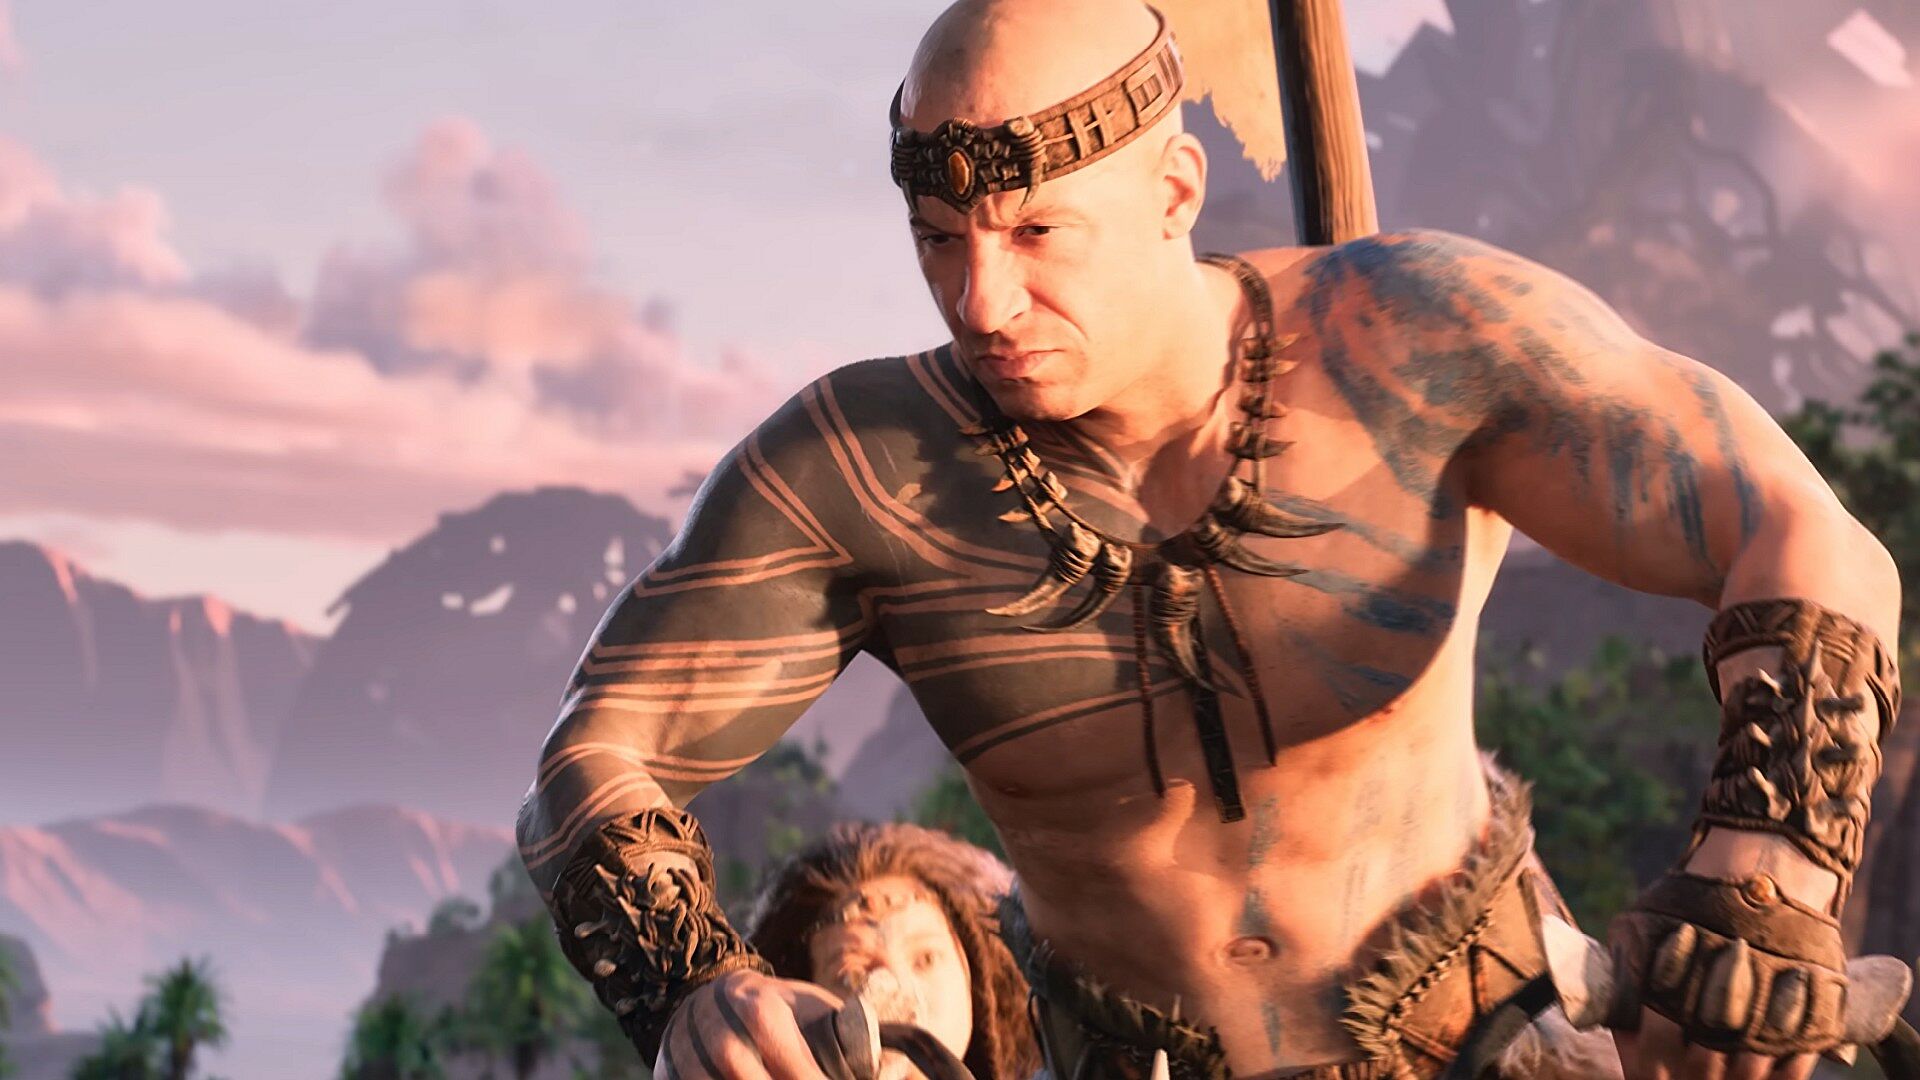 Ark 2 game will be an Xbox exclusive, will have Vin Diesel as